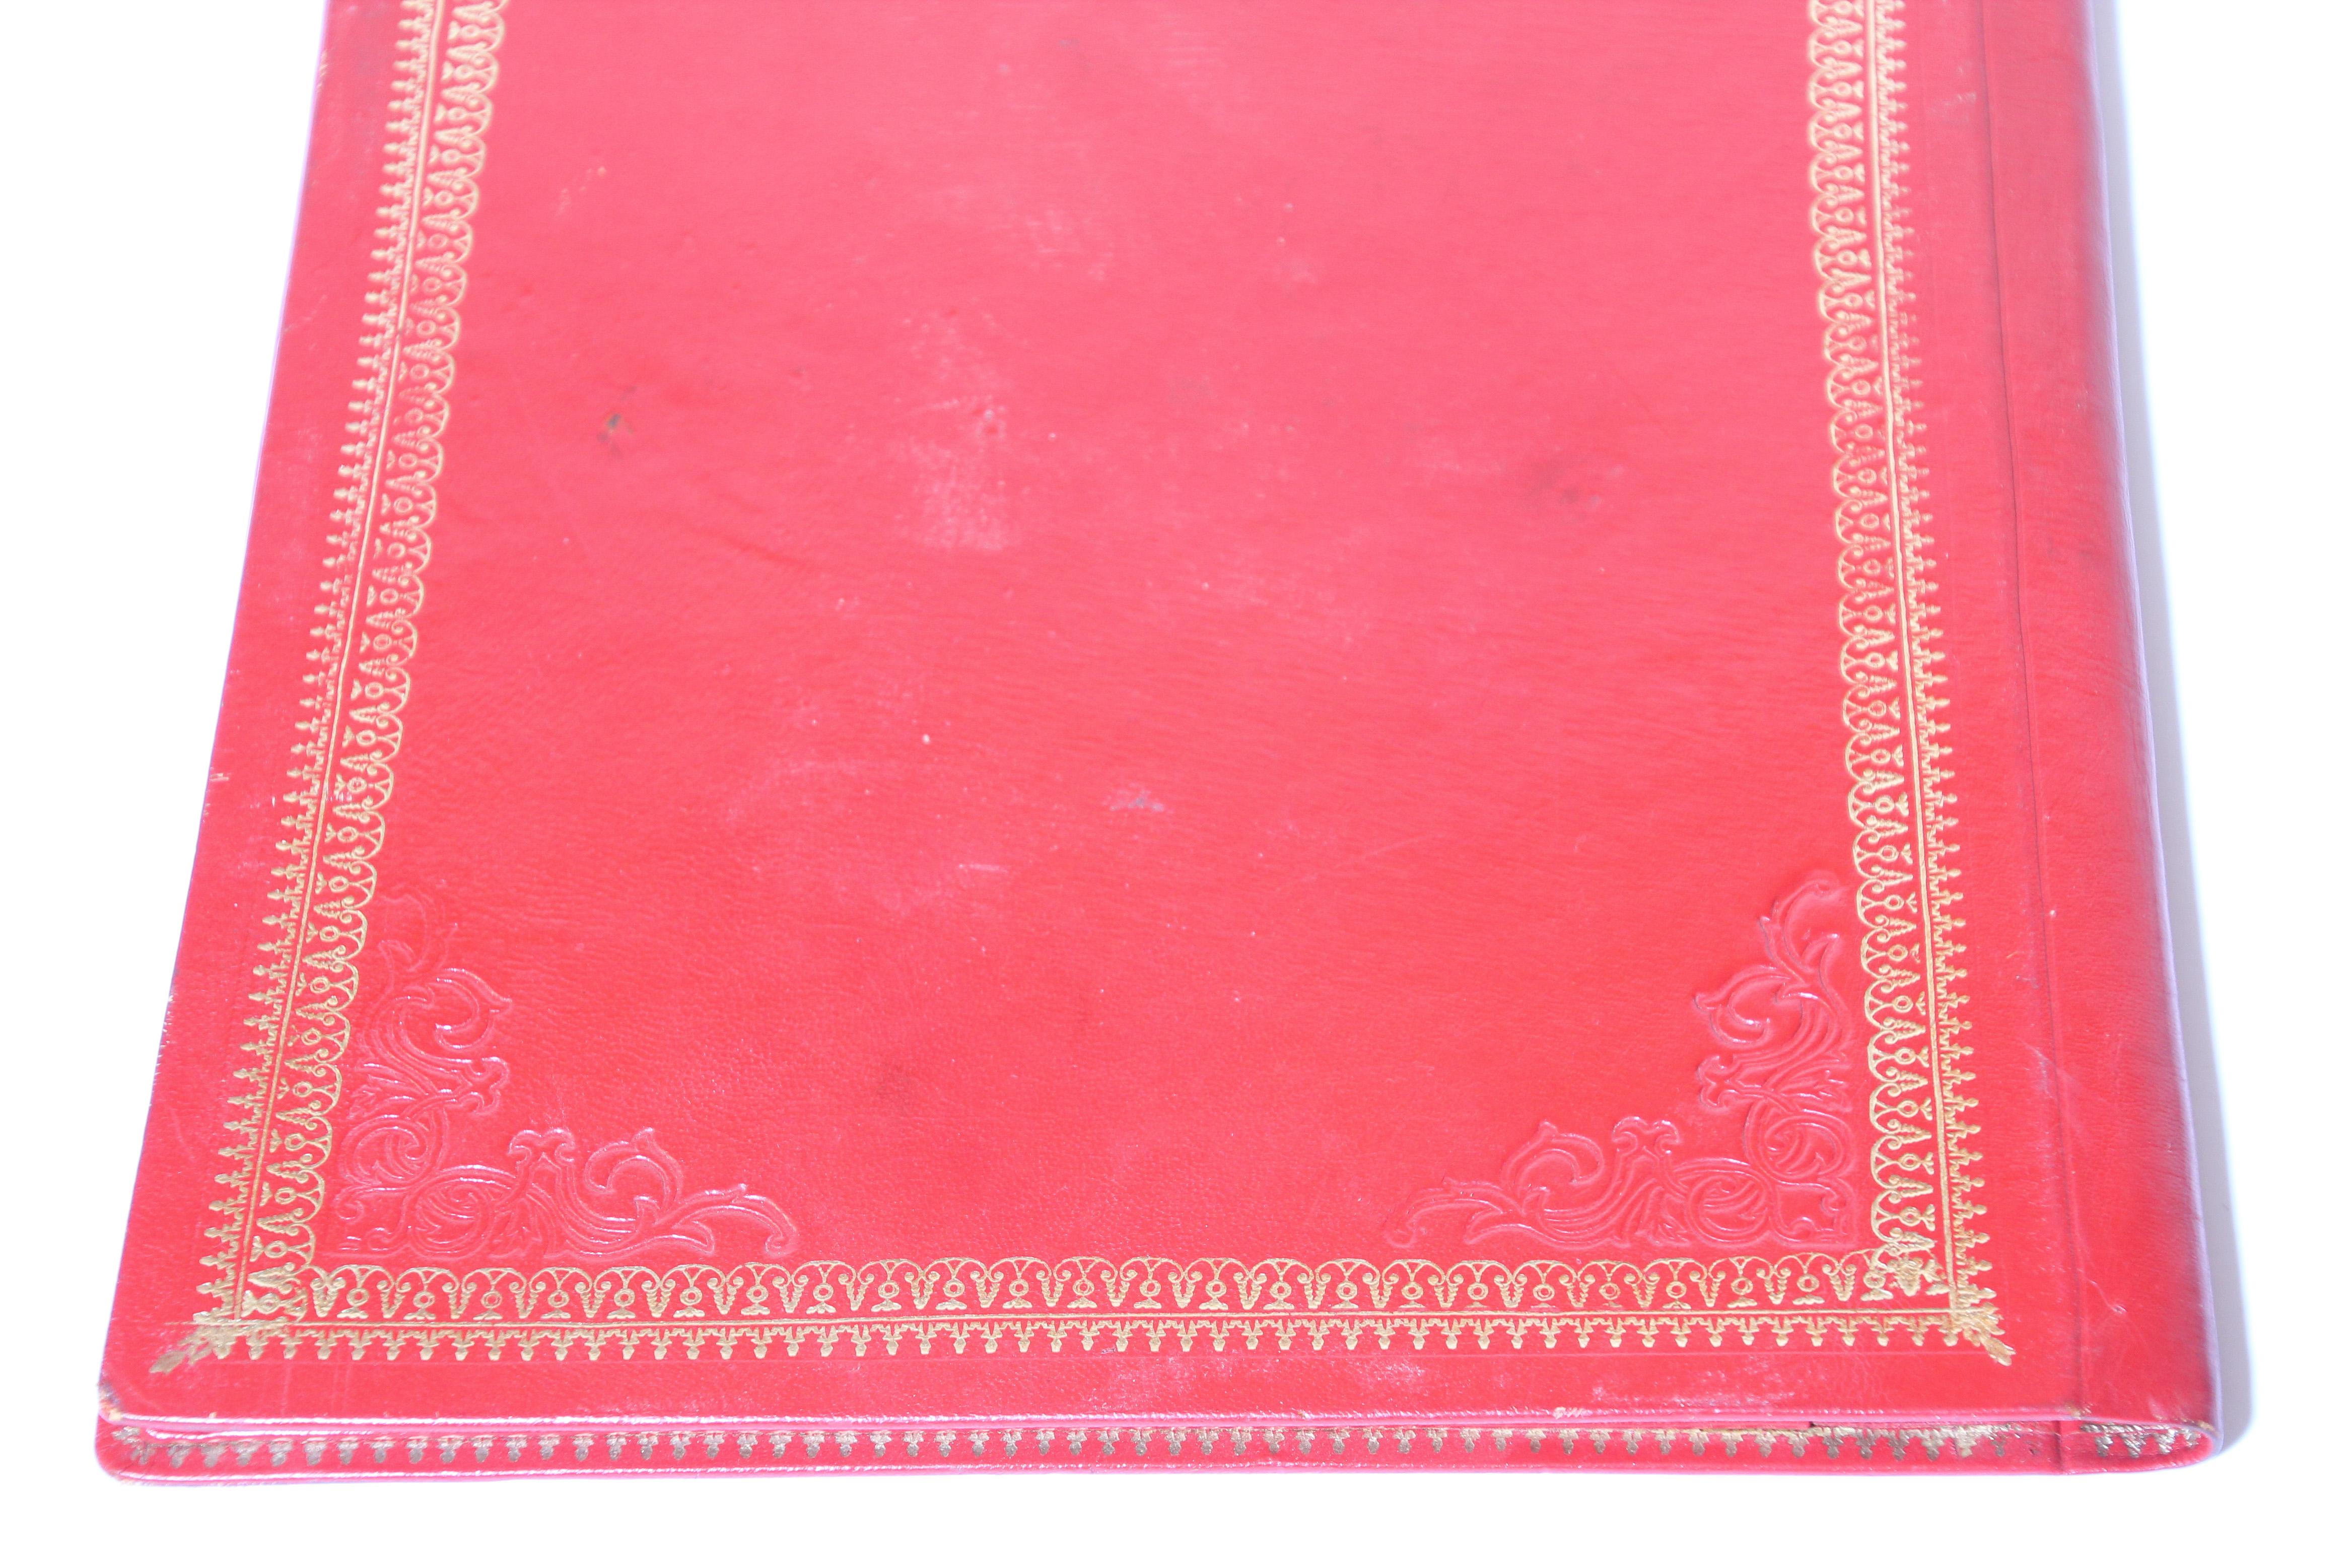 Vintage Moroccan Embossed Leather Padfolio For Sale 2